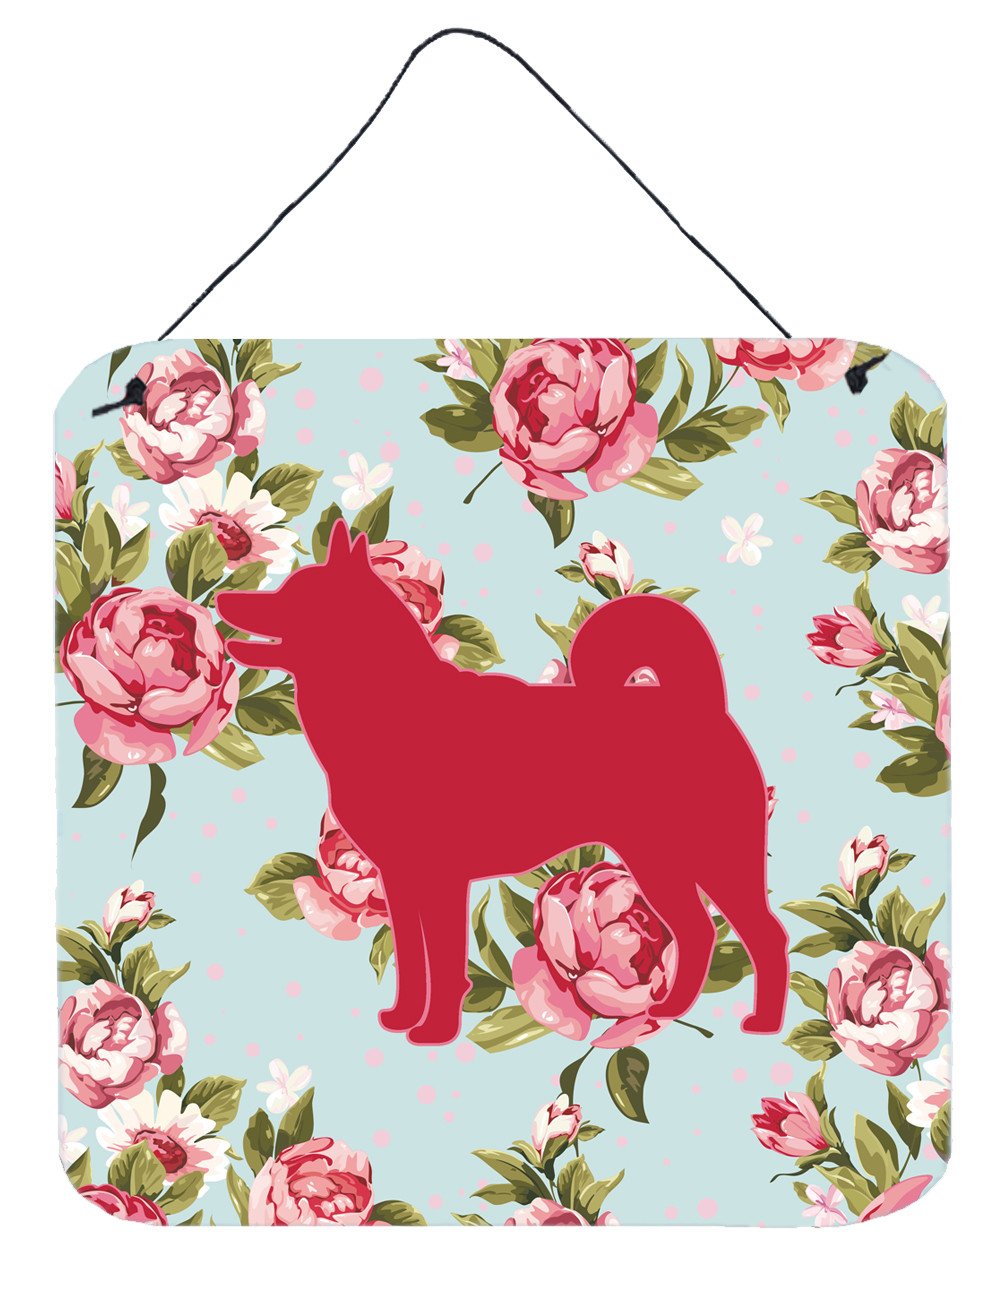 Shiba Inu Shabby Chic Blue Roses Wall or Door Hanging Prints BB1067 by Caroline's Treasures